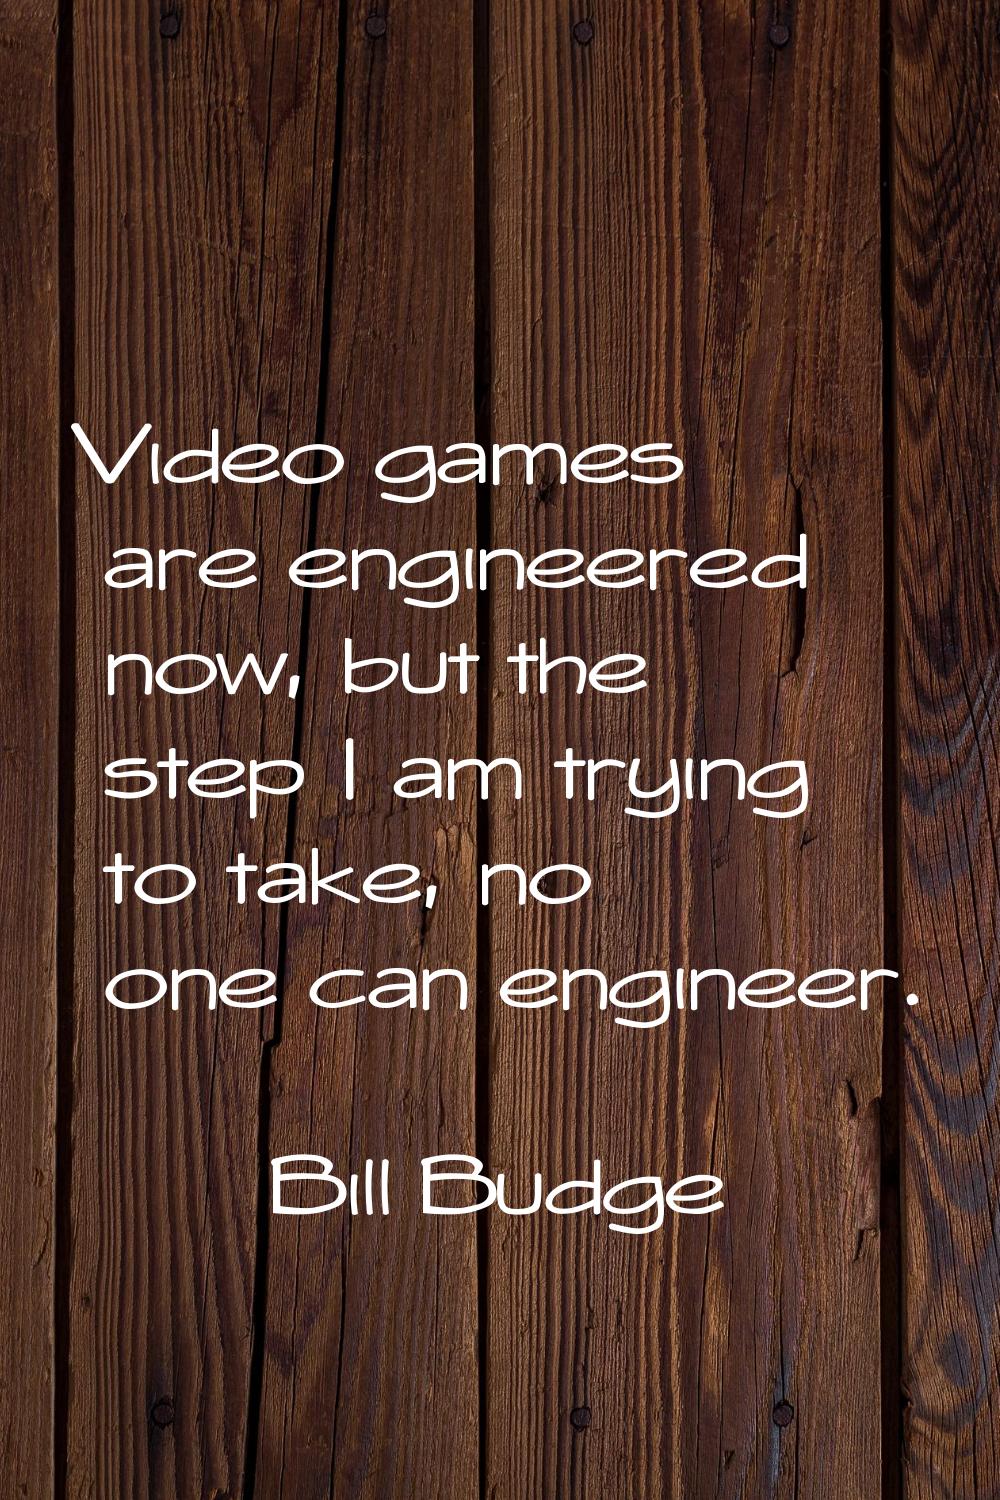 Video games are engineered now, but the step I am trying to take, no one can engineer.